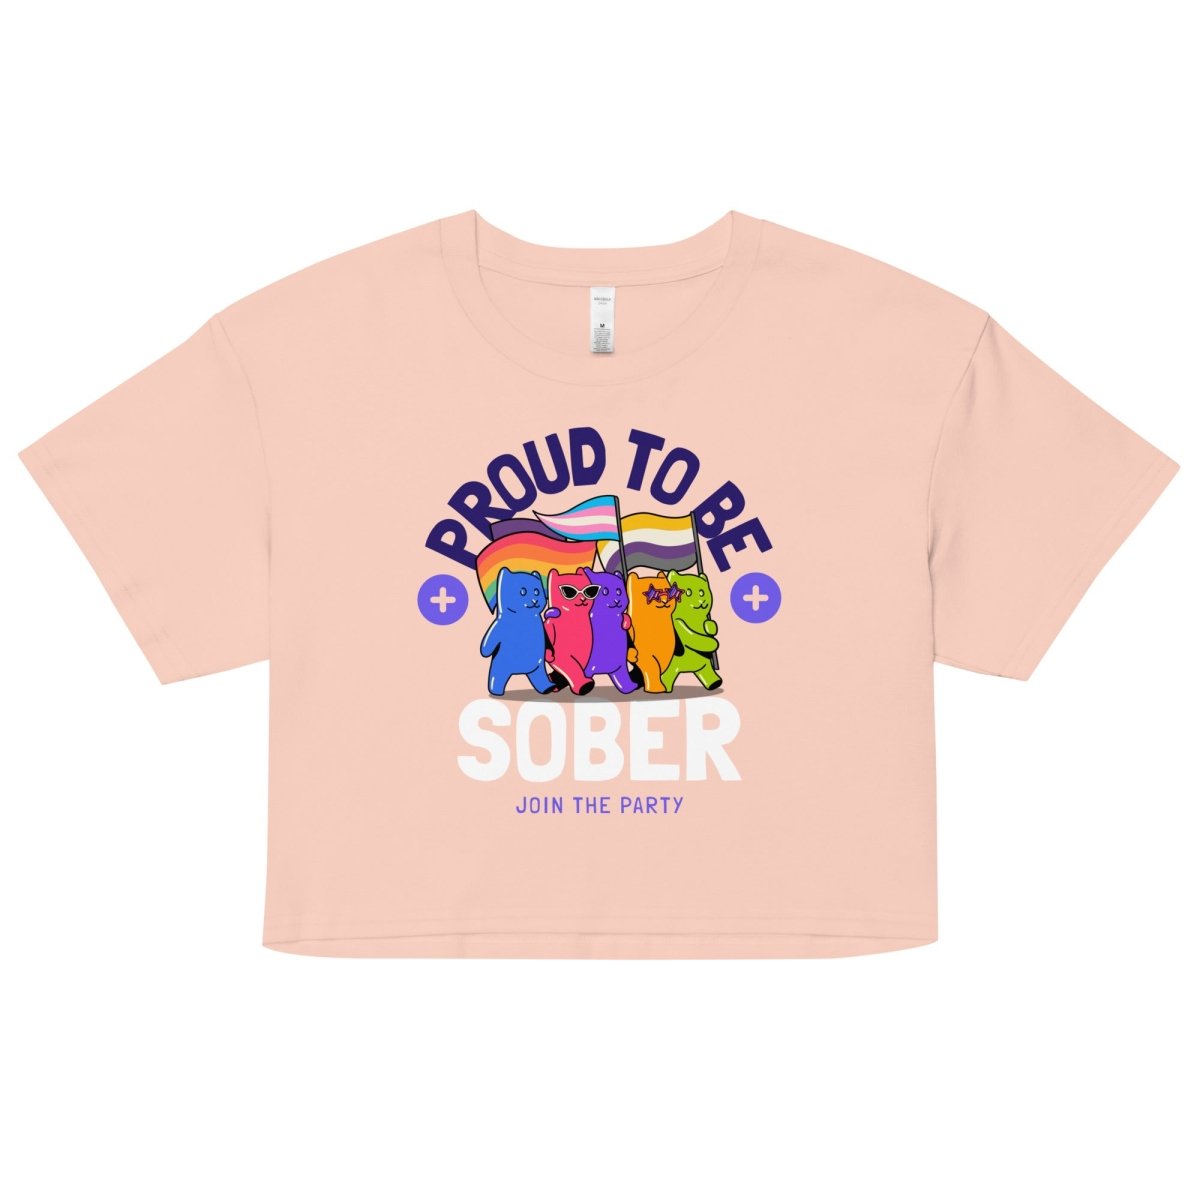 "Proud to be Sober" Women's Crop Top - Rainbow Resilience Collection - Pale Pink / XS | Sobervation